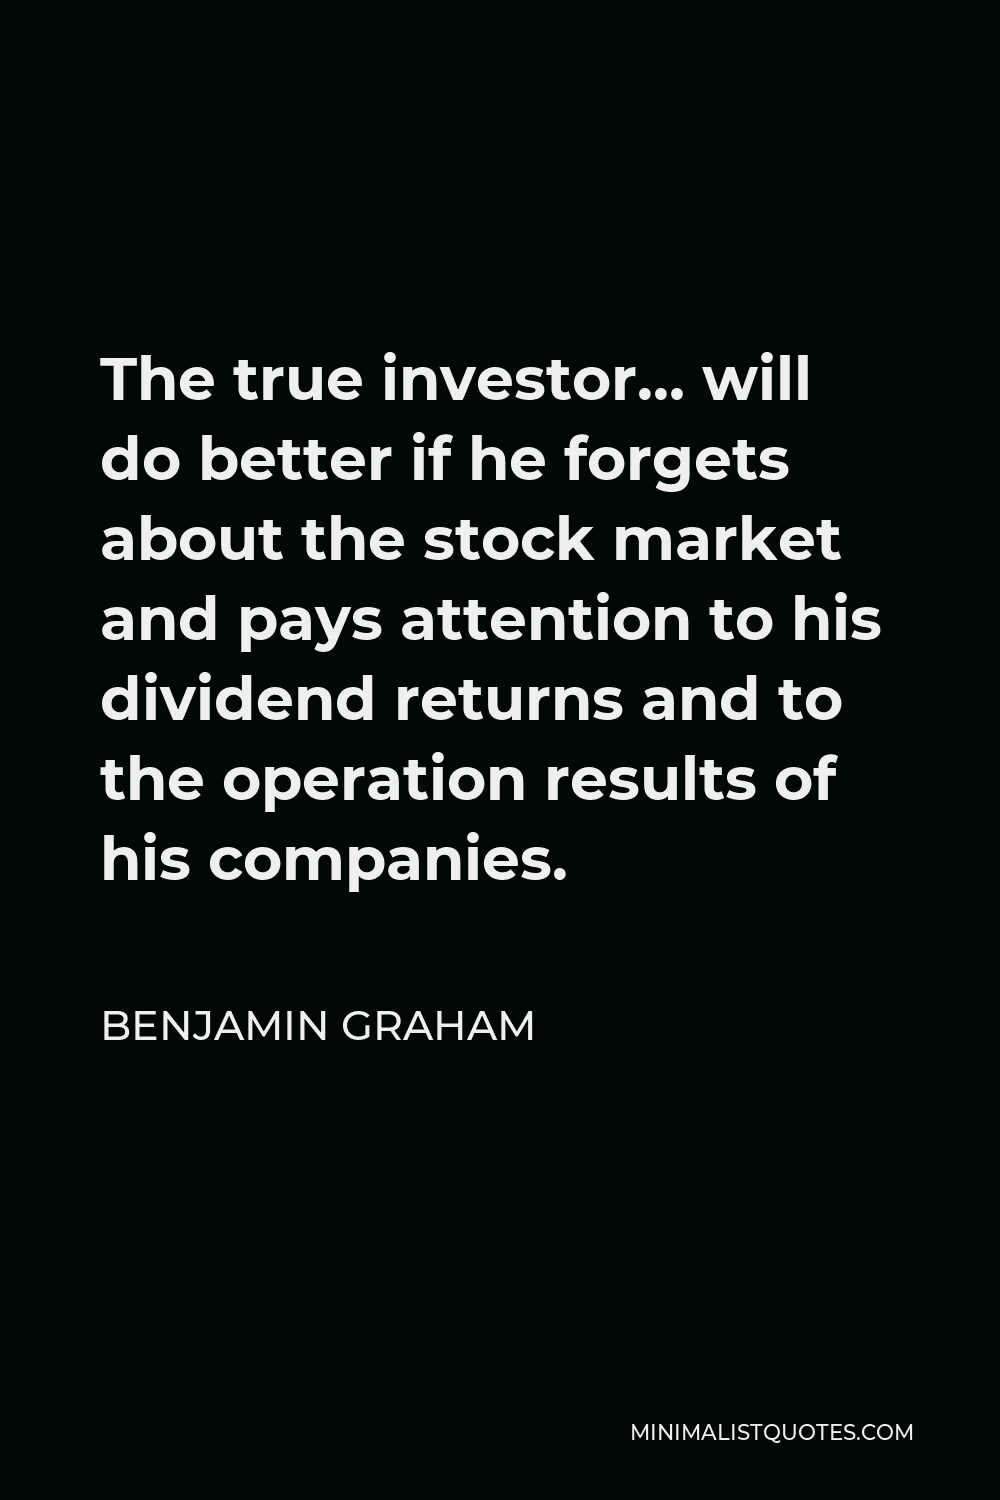 Benjamin Graham Quote - The true investor… will do better if he forgets about the stock market and pays attention to his dividend returns and to the operation results of his companies.